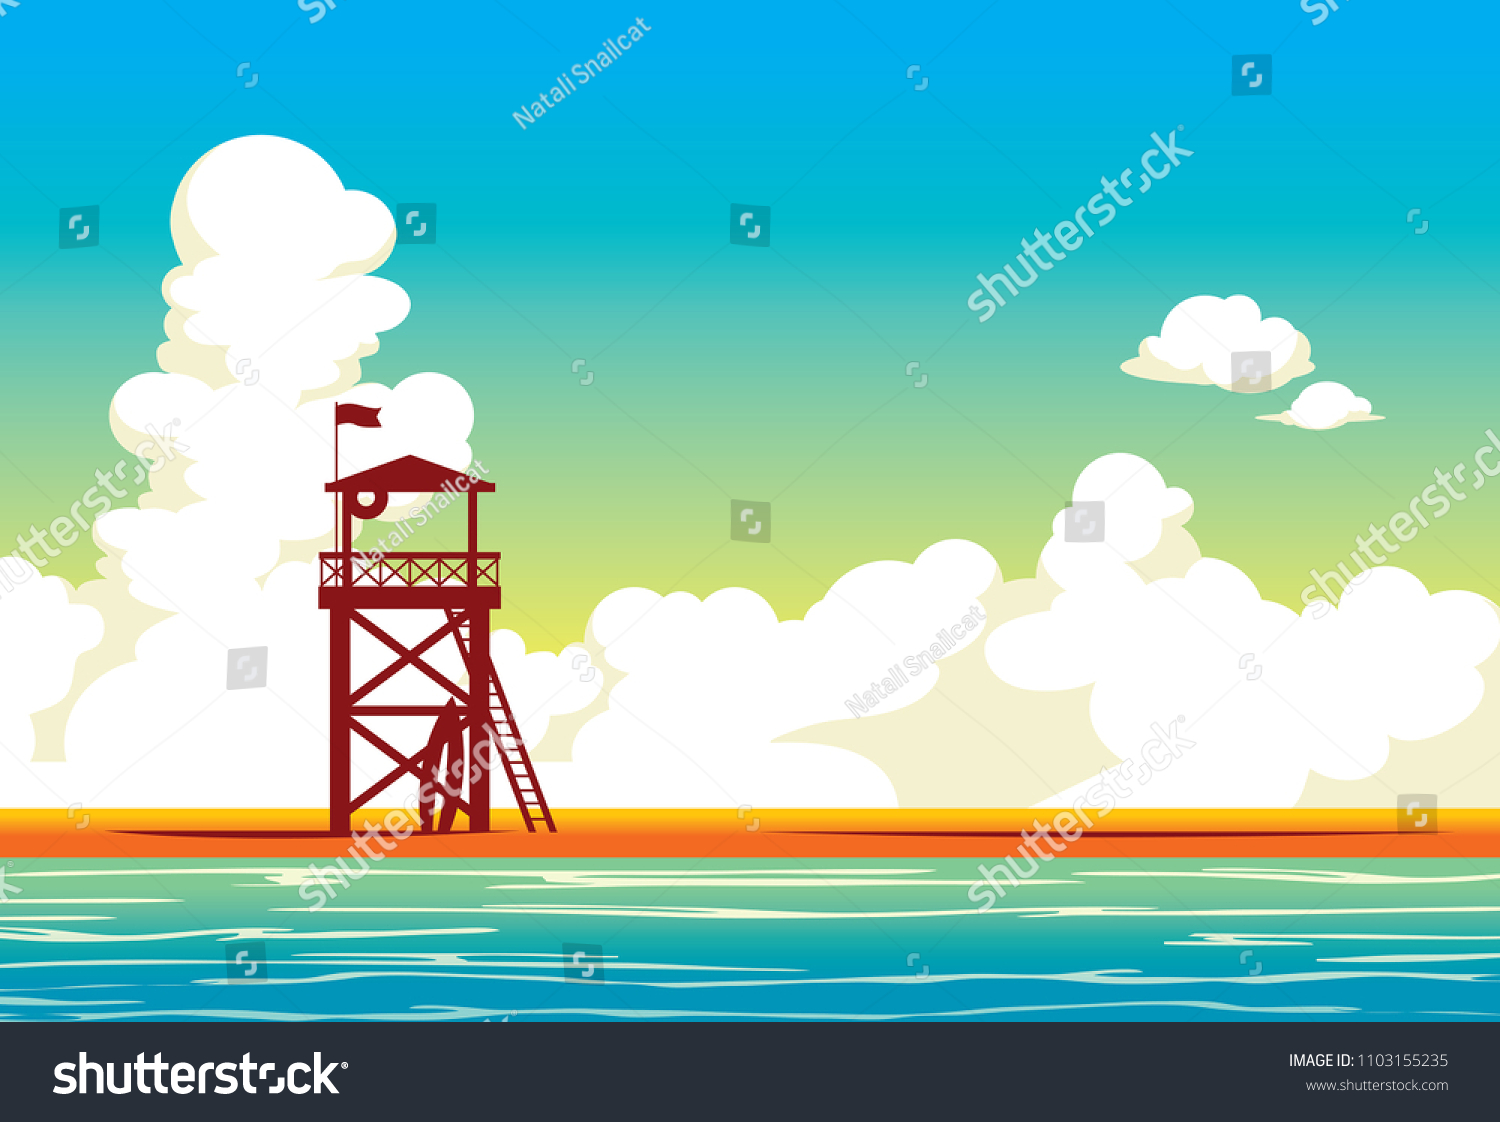 SVG of Lifeguard station on a beach and blue sea on a cloudy sky. Vector illustration with summer landscape. svg